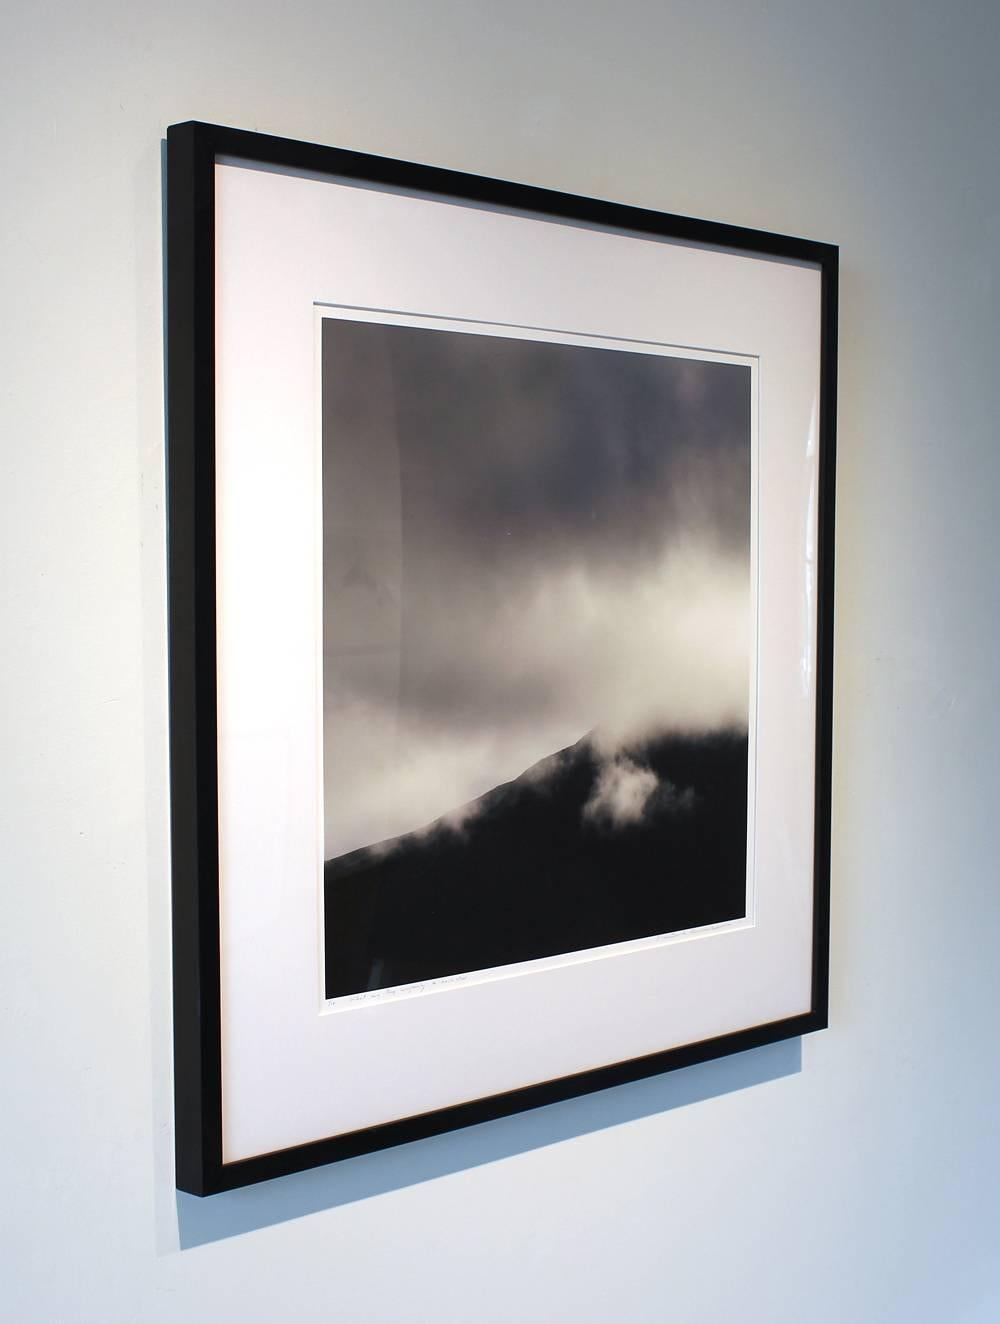 What are they whispering to each other, landscape photograph of Iceland  - Photograph by Mariette Roodenburg